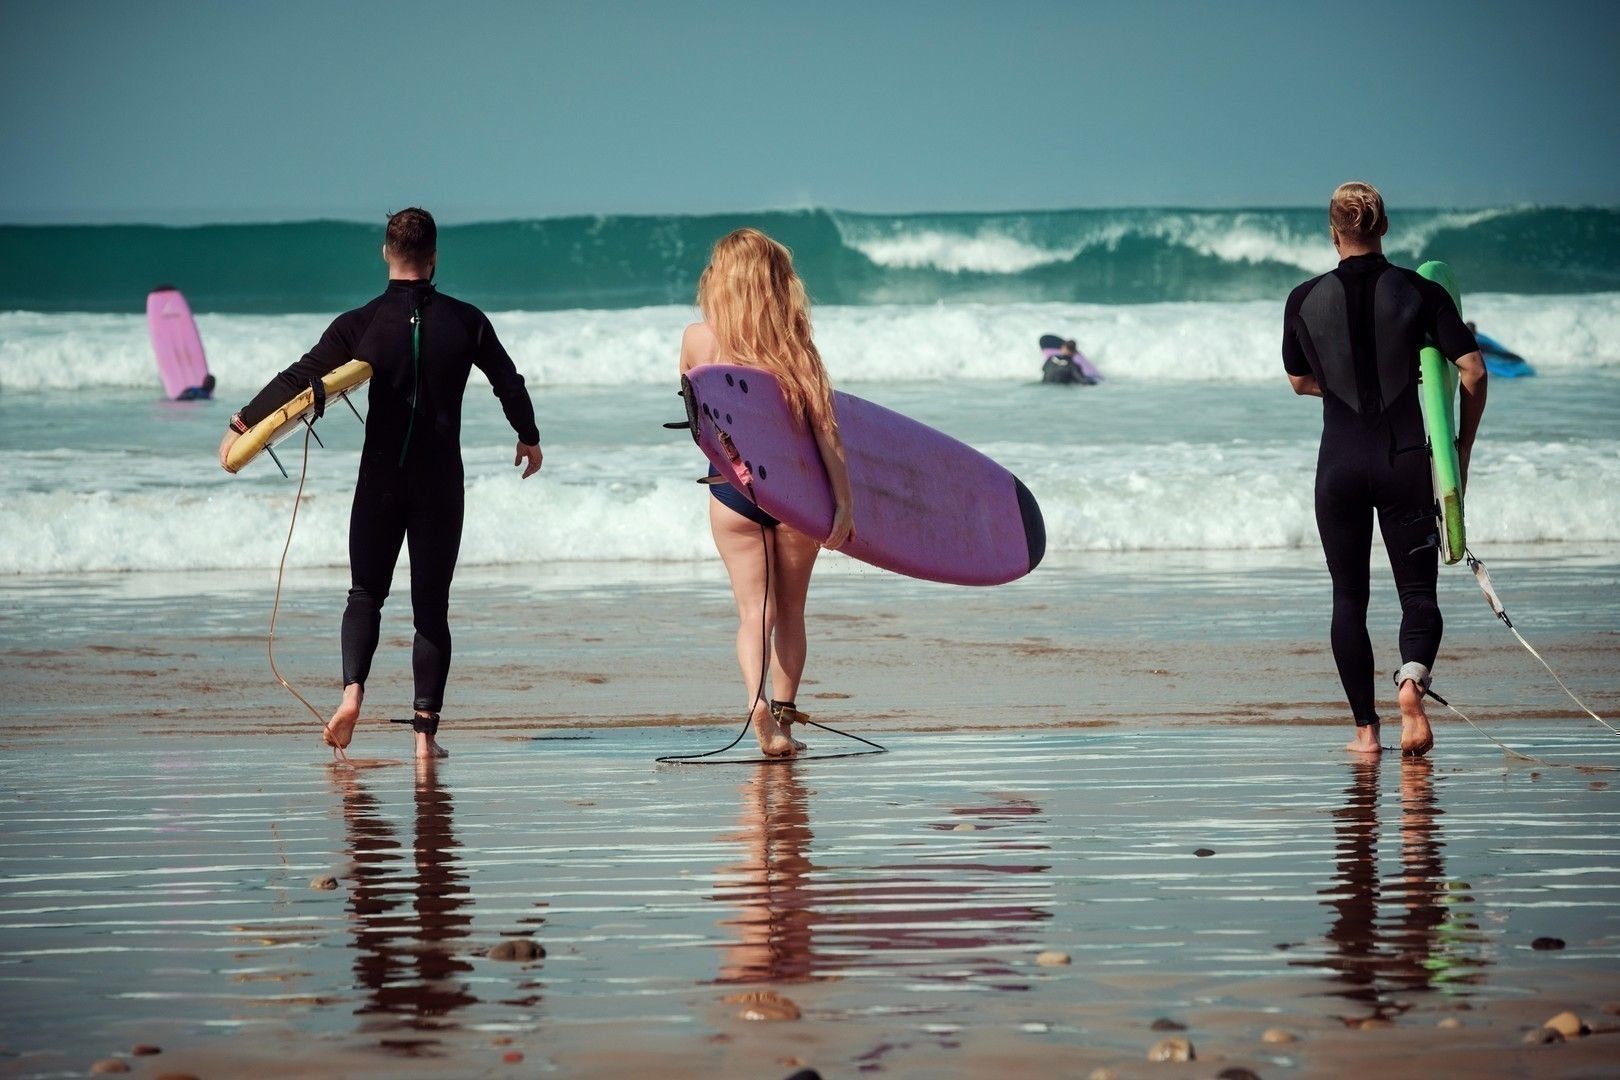 Surfer friends on a beach with a surfing boards